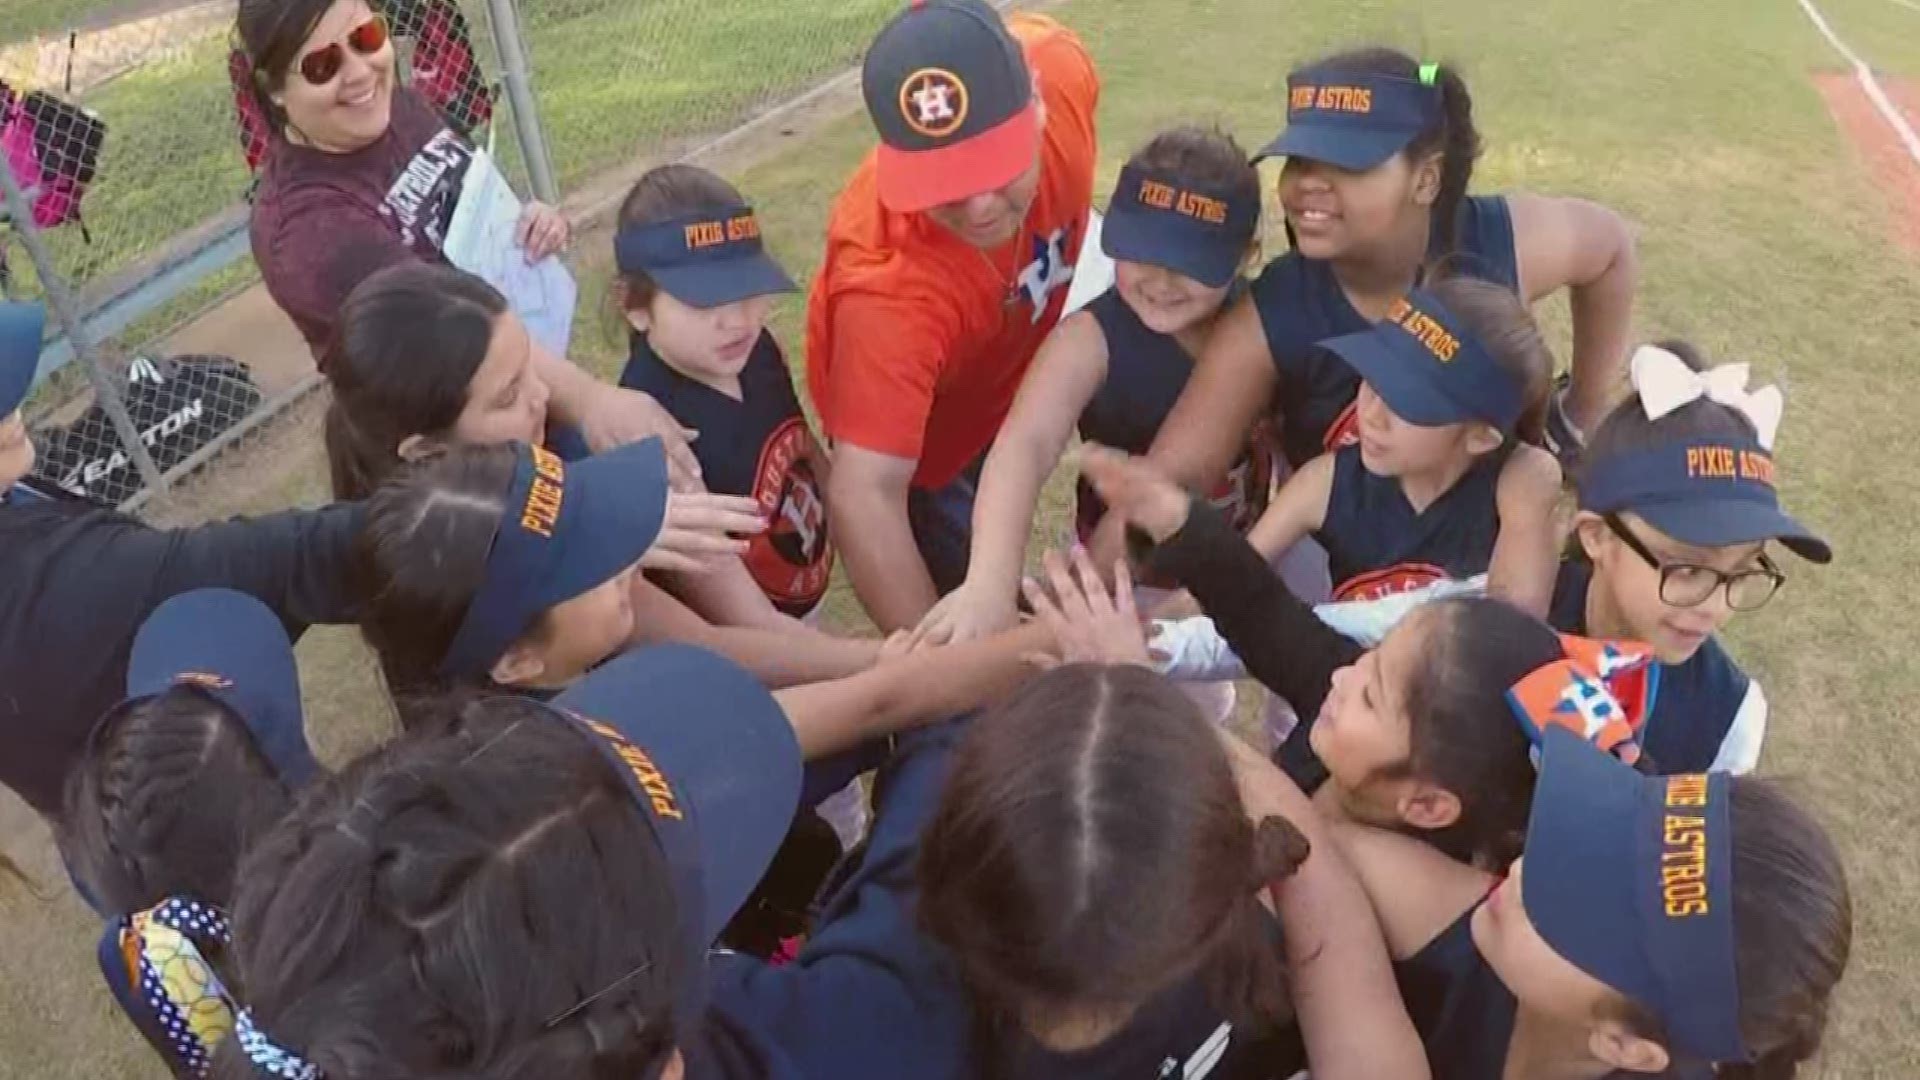 A little league team is thriving thanks to the Houston Astros. But it's a group of girls who are knocking it out of the park.